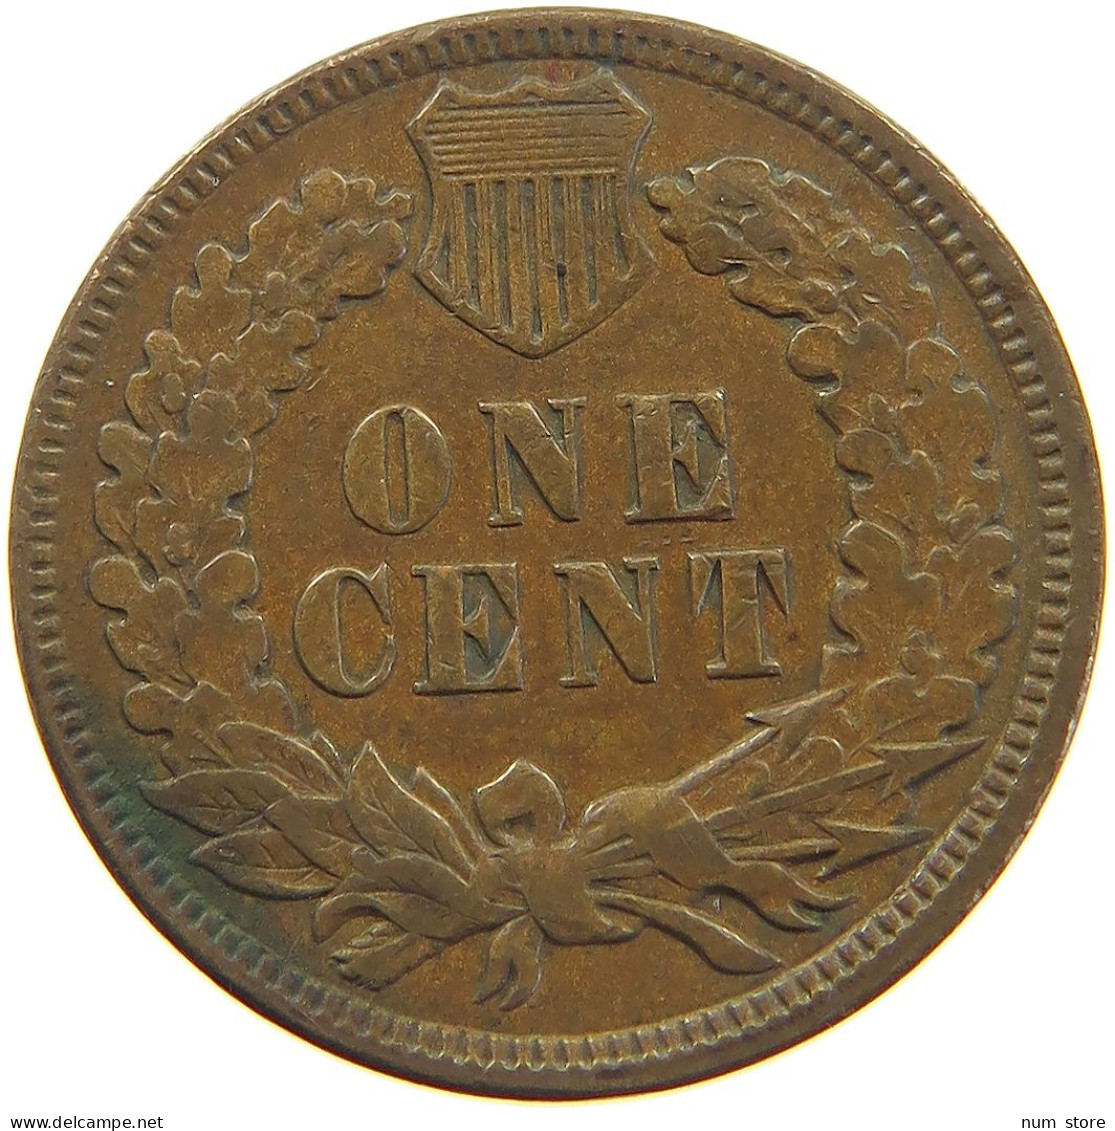 UNITED STATES OF AMERICA CENT 1891 INDIAN HEAD #t001 0163 - 1859-1909: Indian Head